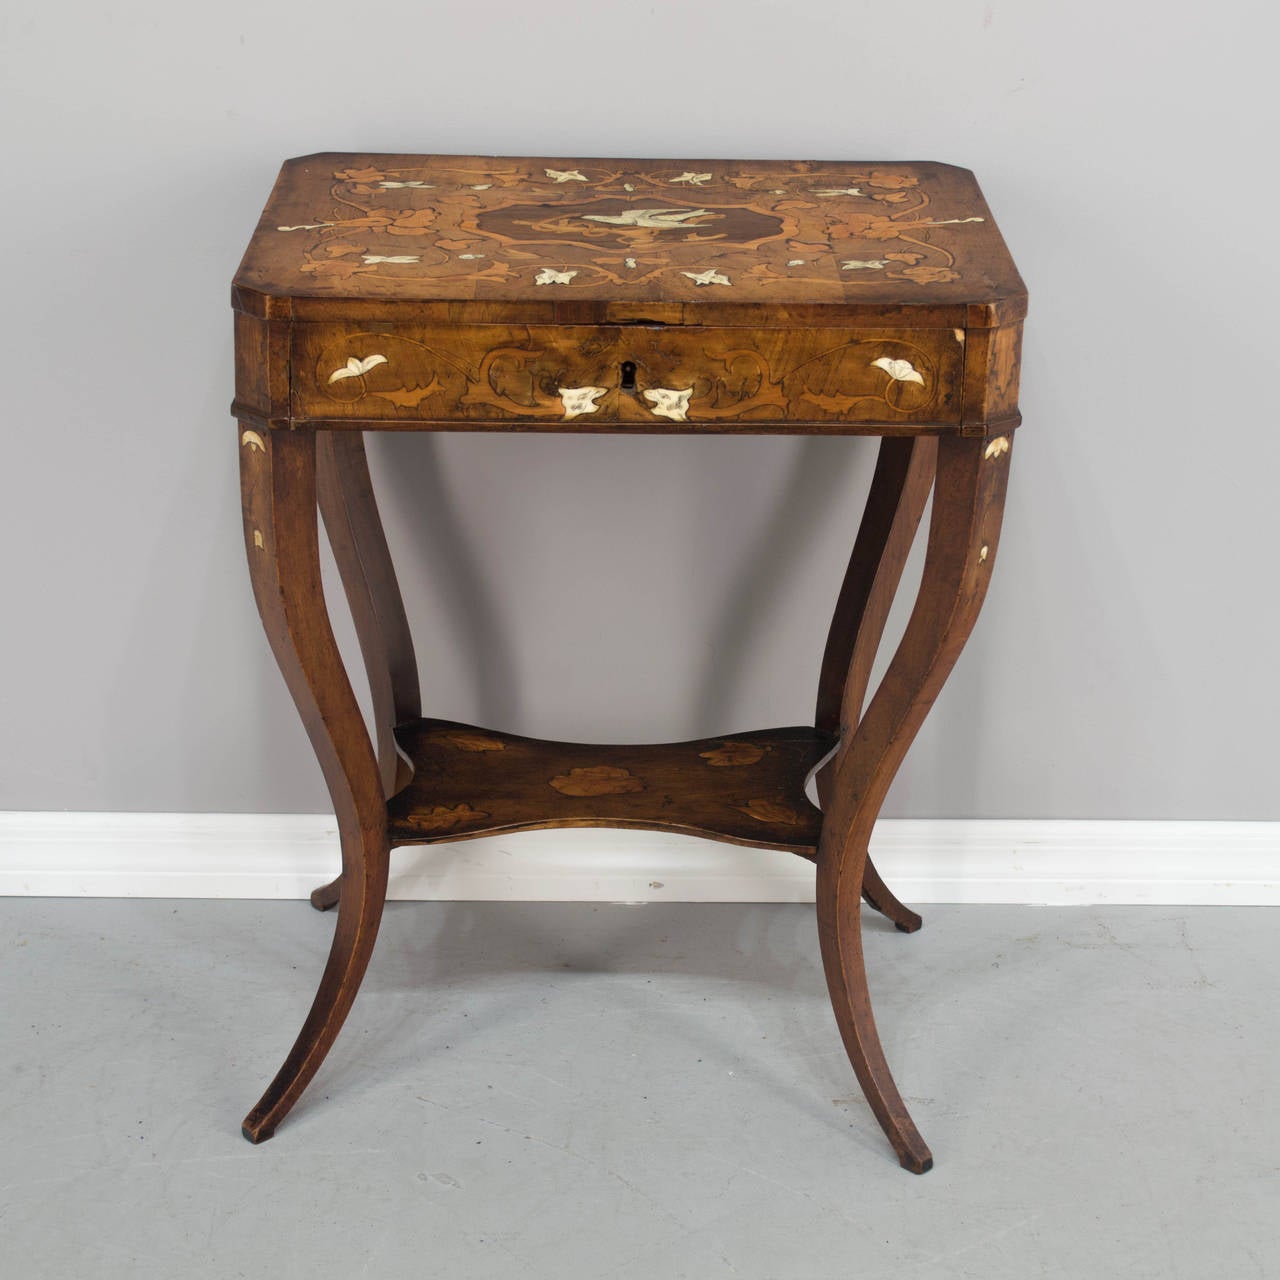 A 19th century Italian side table made of walnut and cherry with bone inlay. Beautiful marquetry decoration with entwined vines and flowers surrounding a  white dove. One dovetailed drawer with divided compartments. Curved legs and lower shelf.